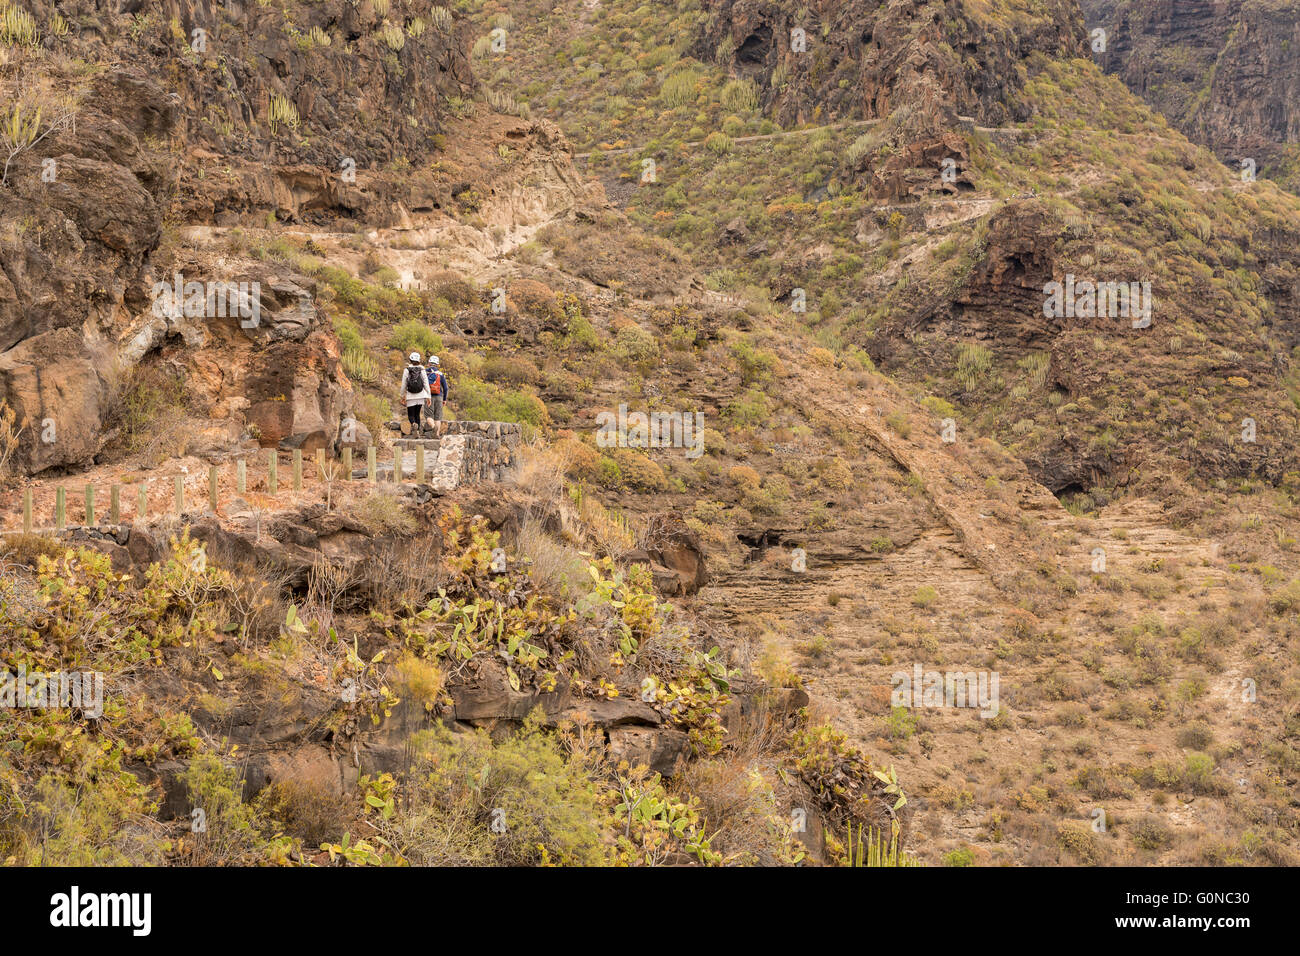 Walkers setting out on the Barranco del Infierno walk in Adeje wearing safety helmets against possible injury from falling rocks Stock Photo